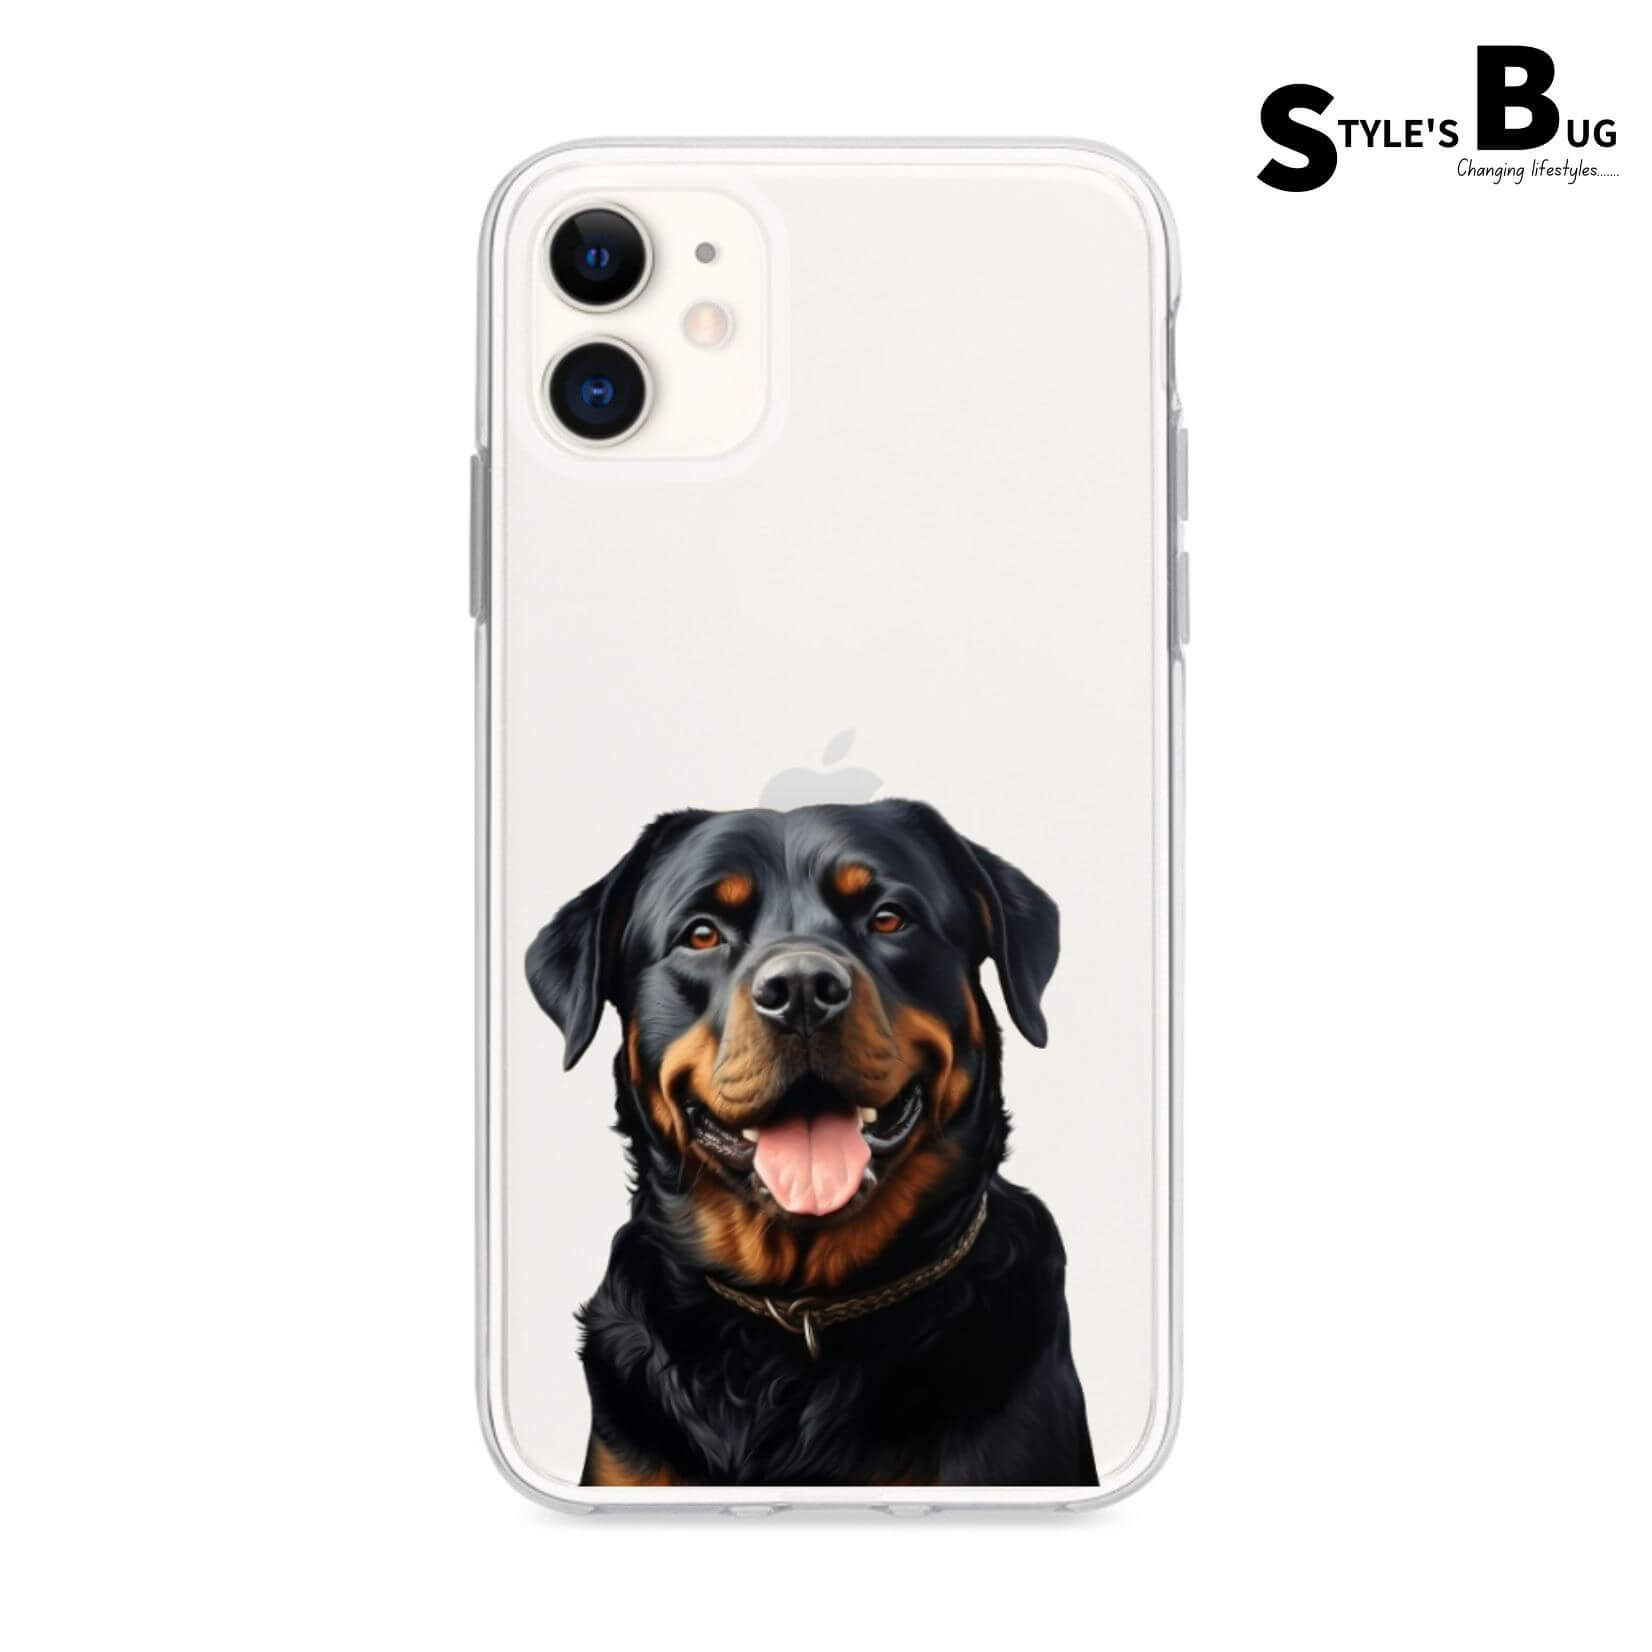 Smiling Dog phone cases from Style's Bug (UV printed) - Style's Bug Rottweiller